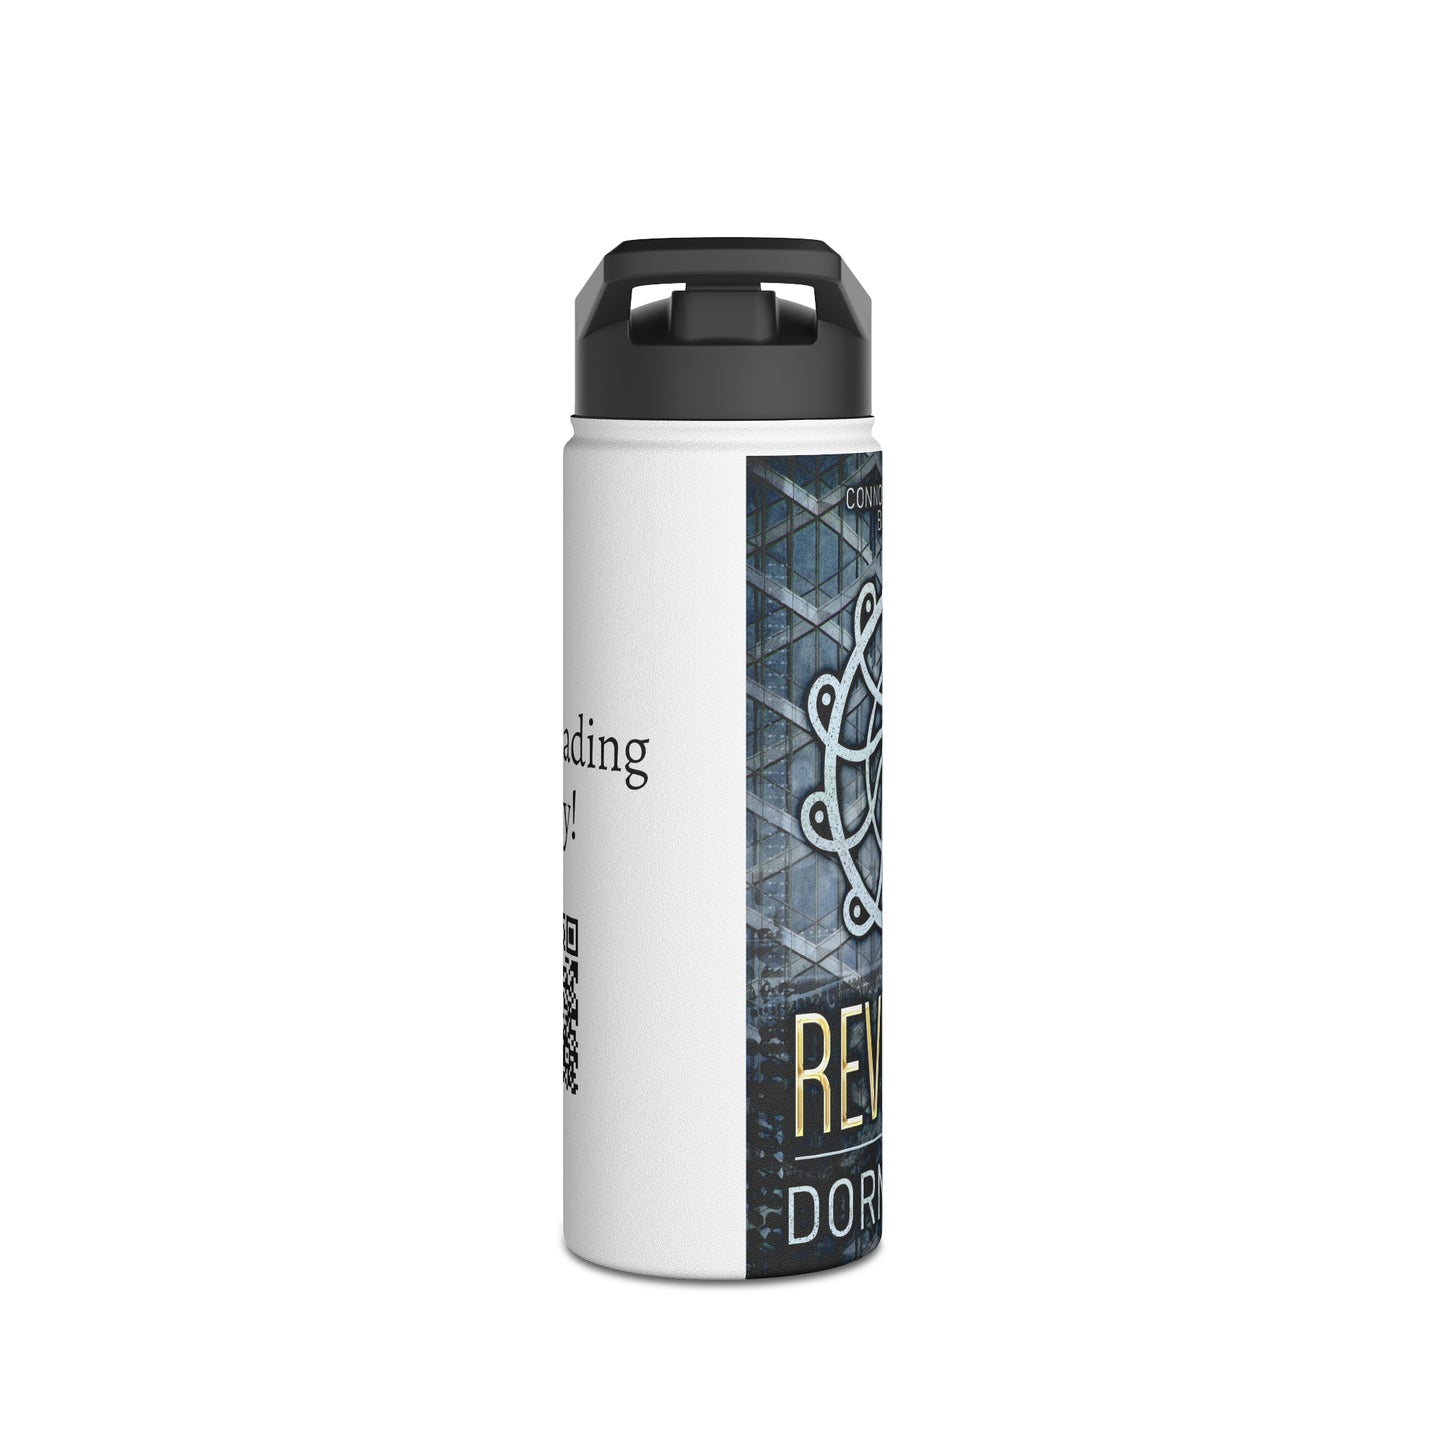 The Revealed - Stainless Steel Water Bottle